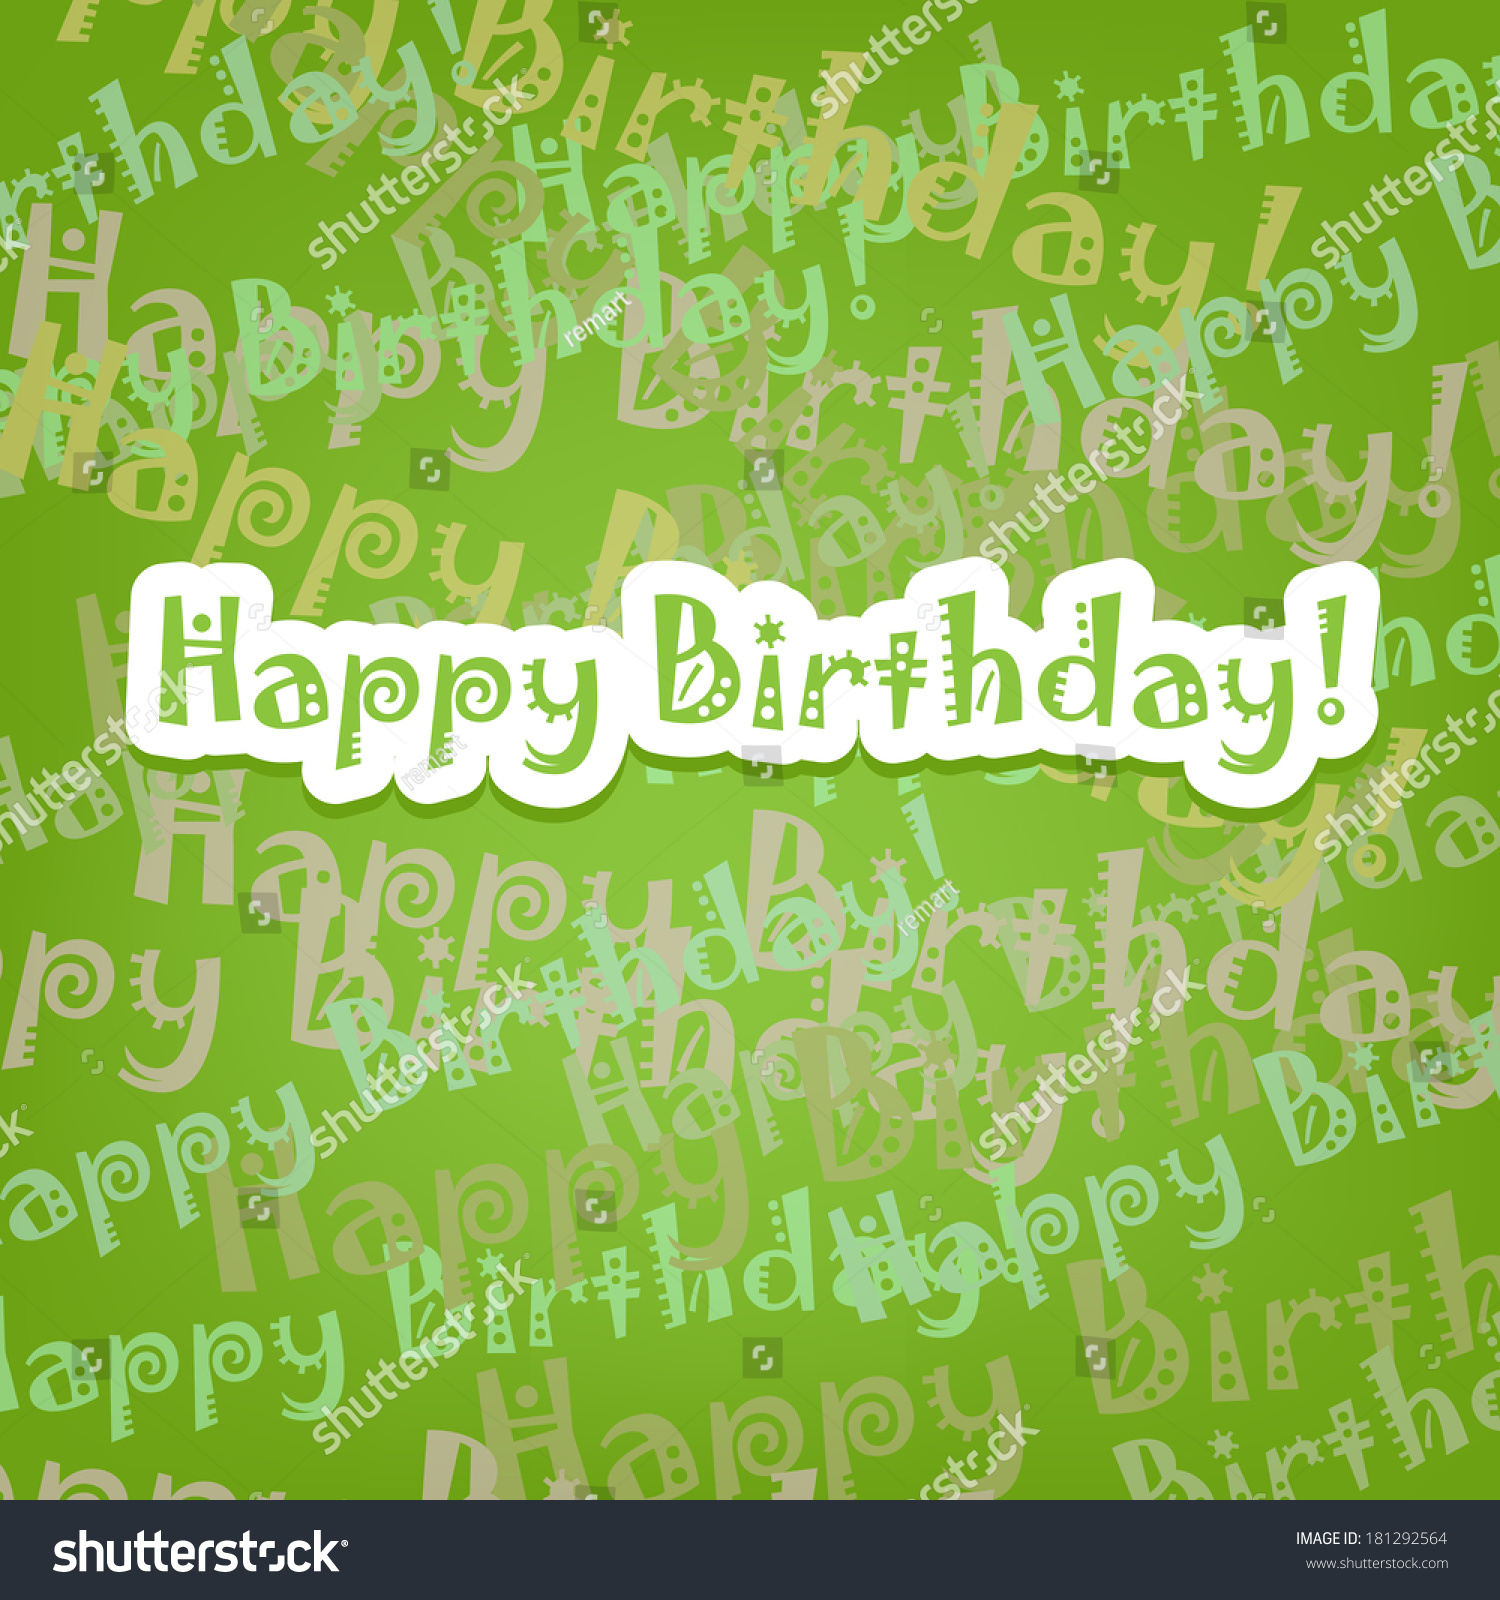 Happy birthday card with typo pattern on green #181292564